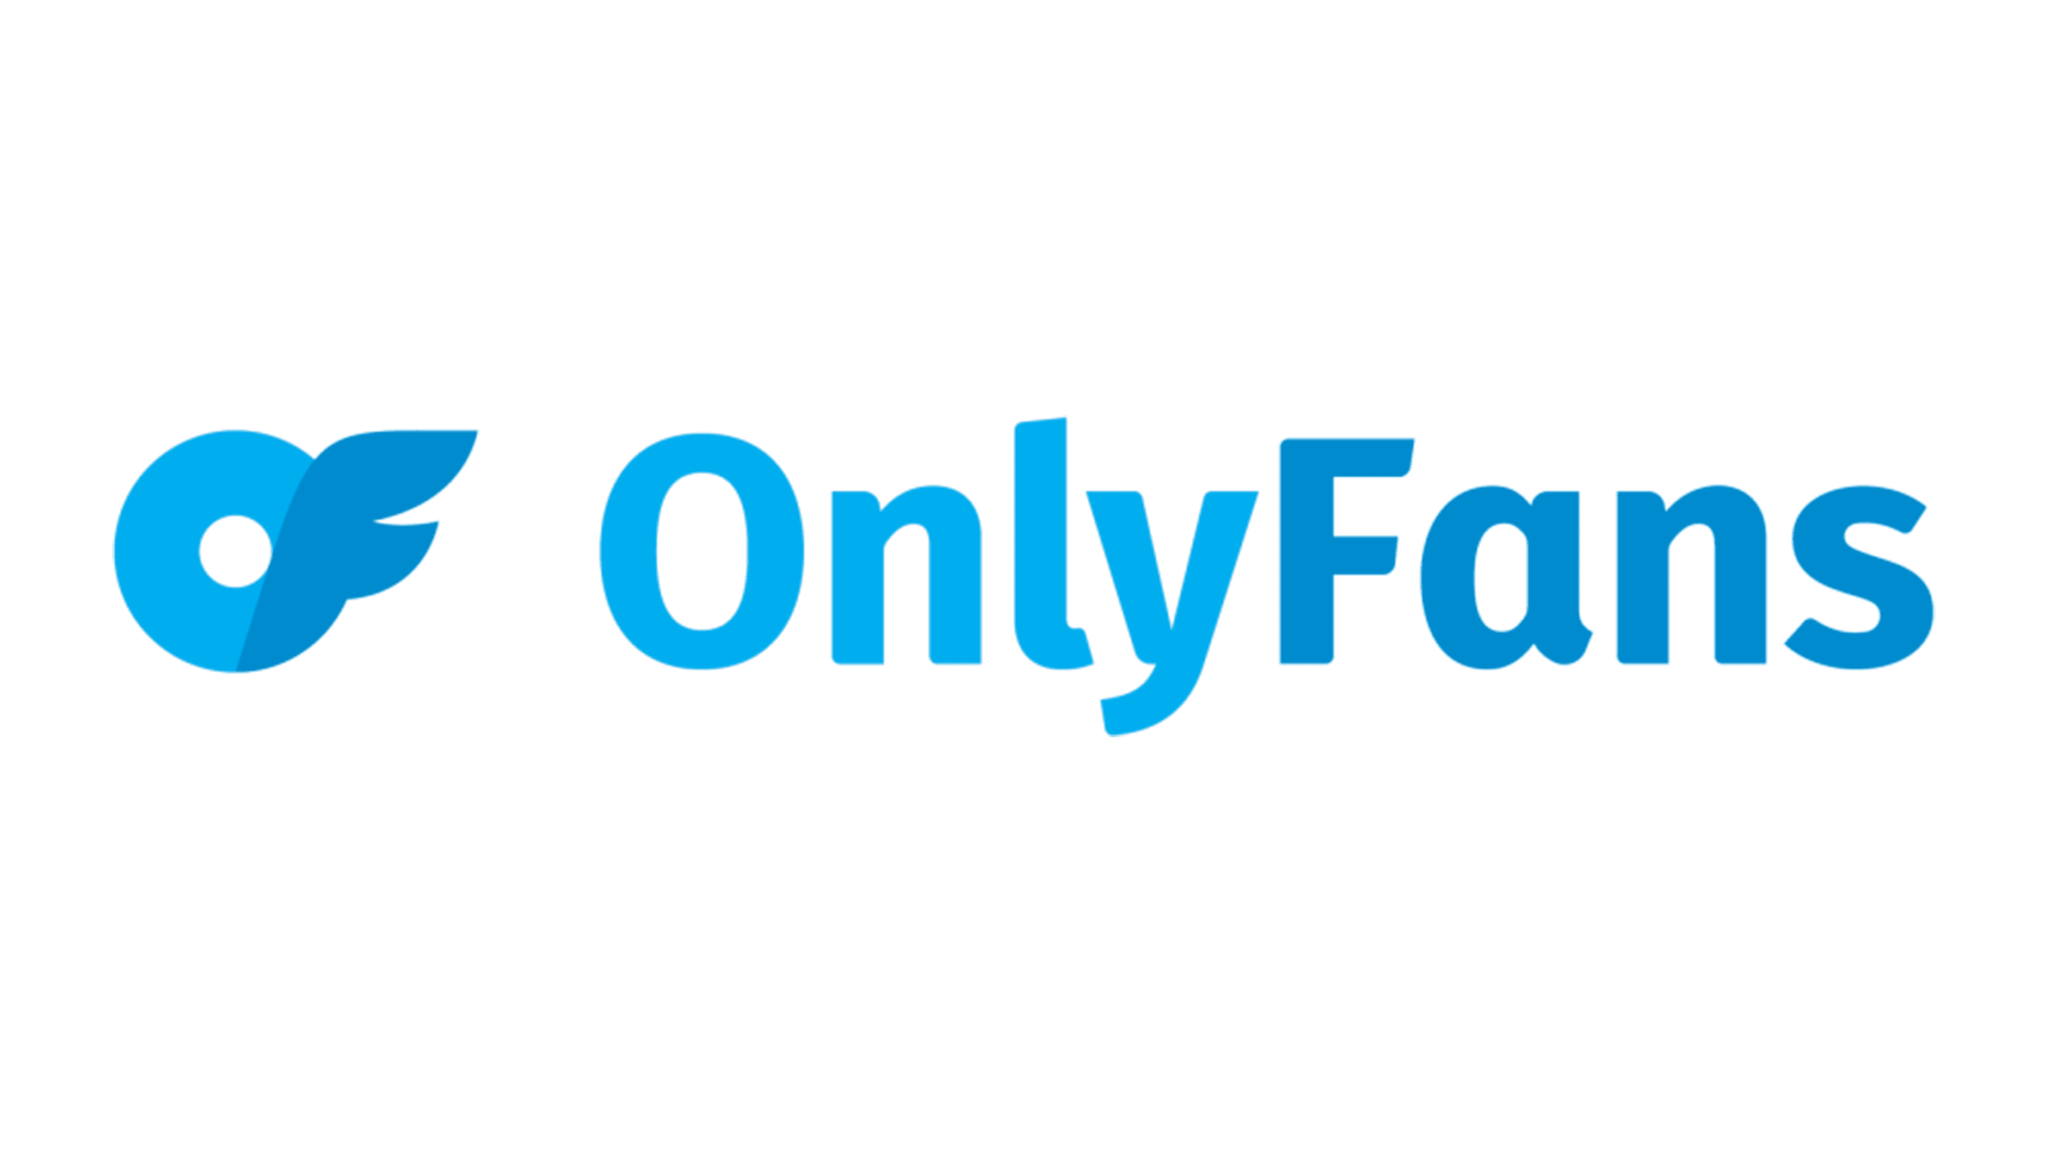 how to download video from onlyfans iphone